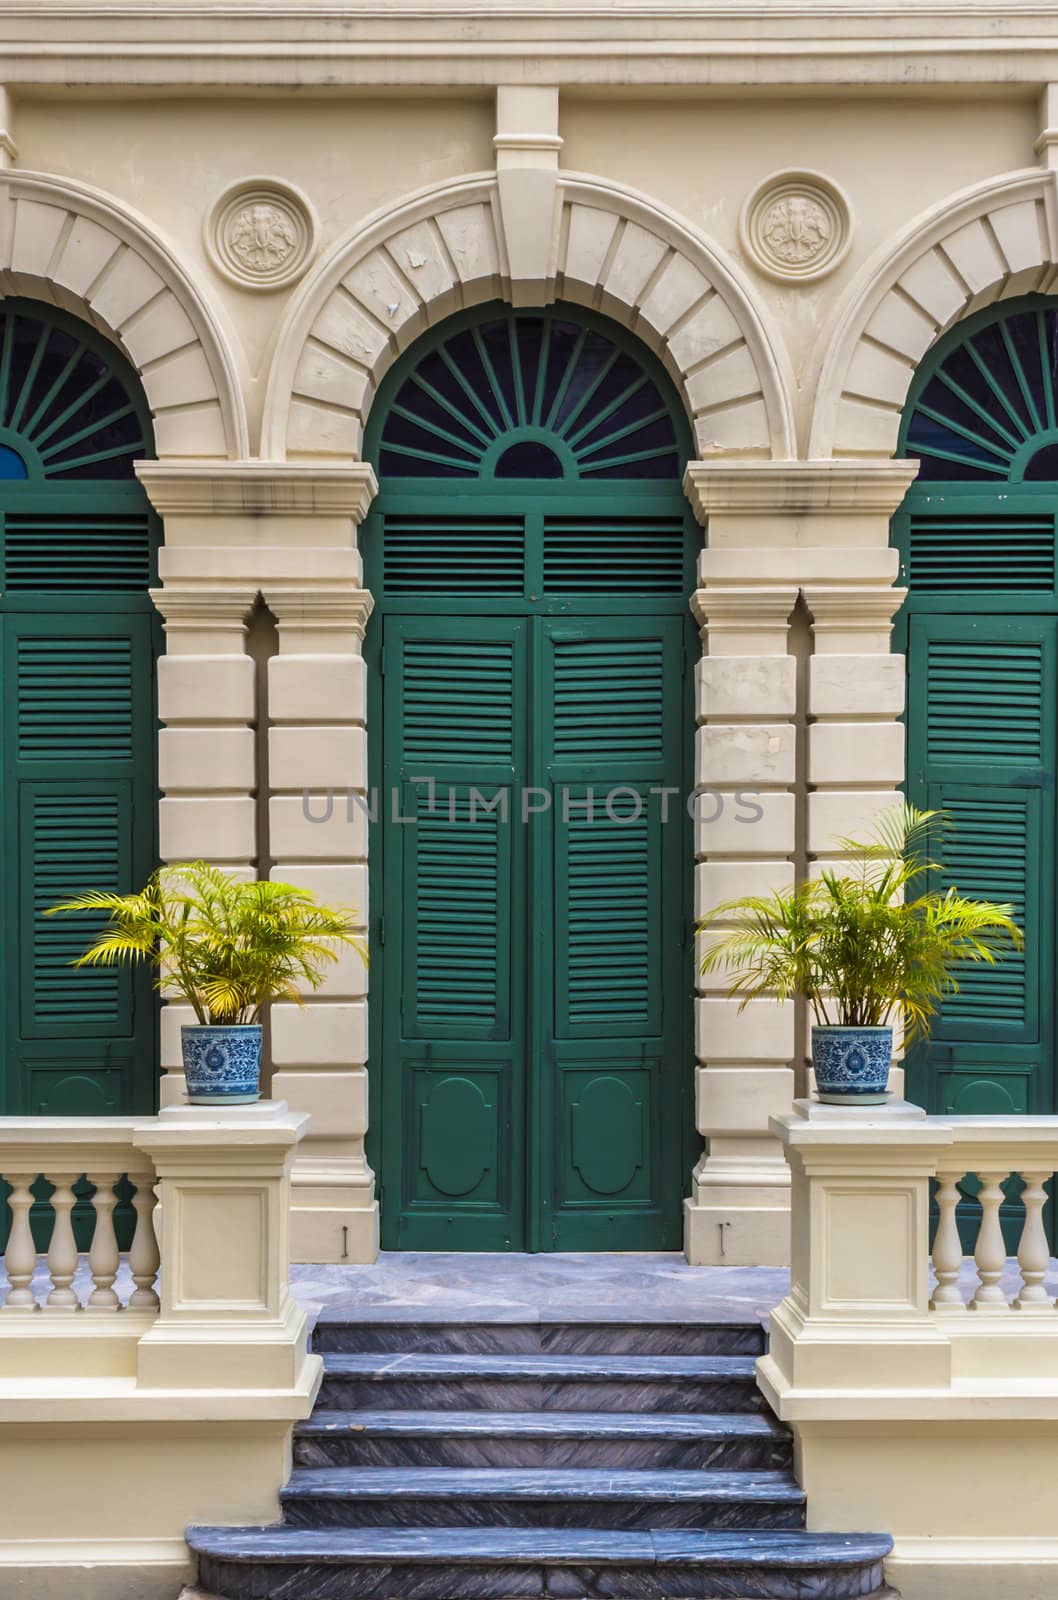 European style green door of old building in Grand Palace ,Bangkok Thailand. This photo is taken at the tourist's exit of Grand Palace.